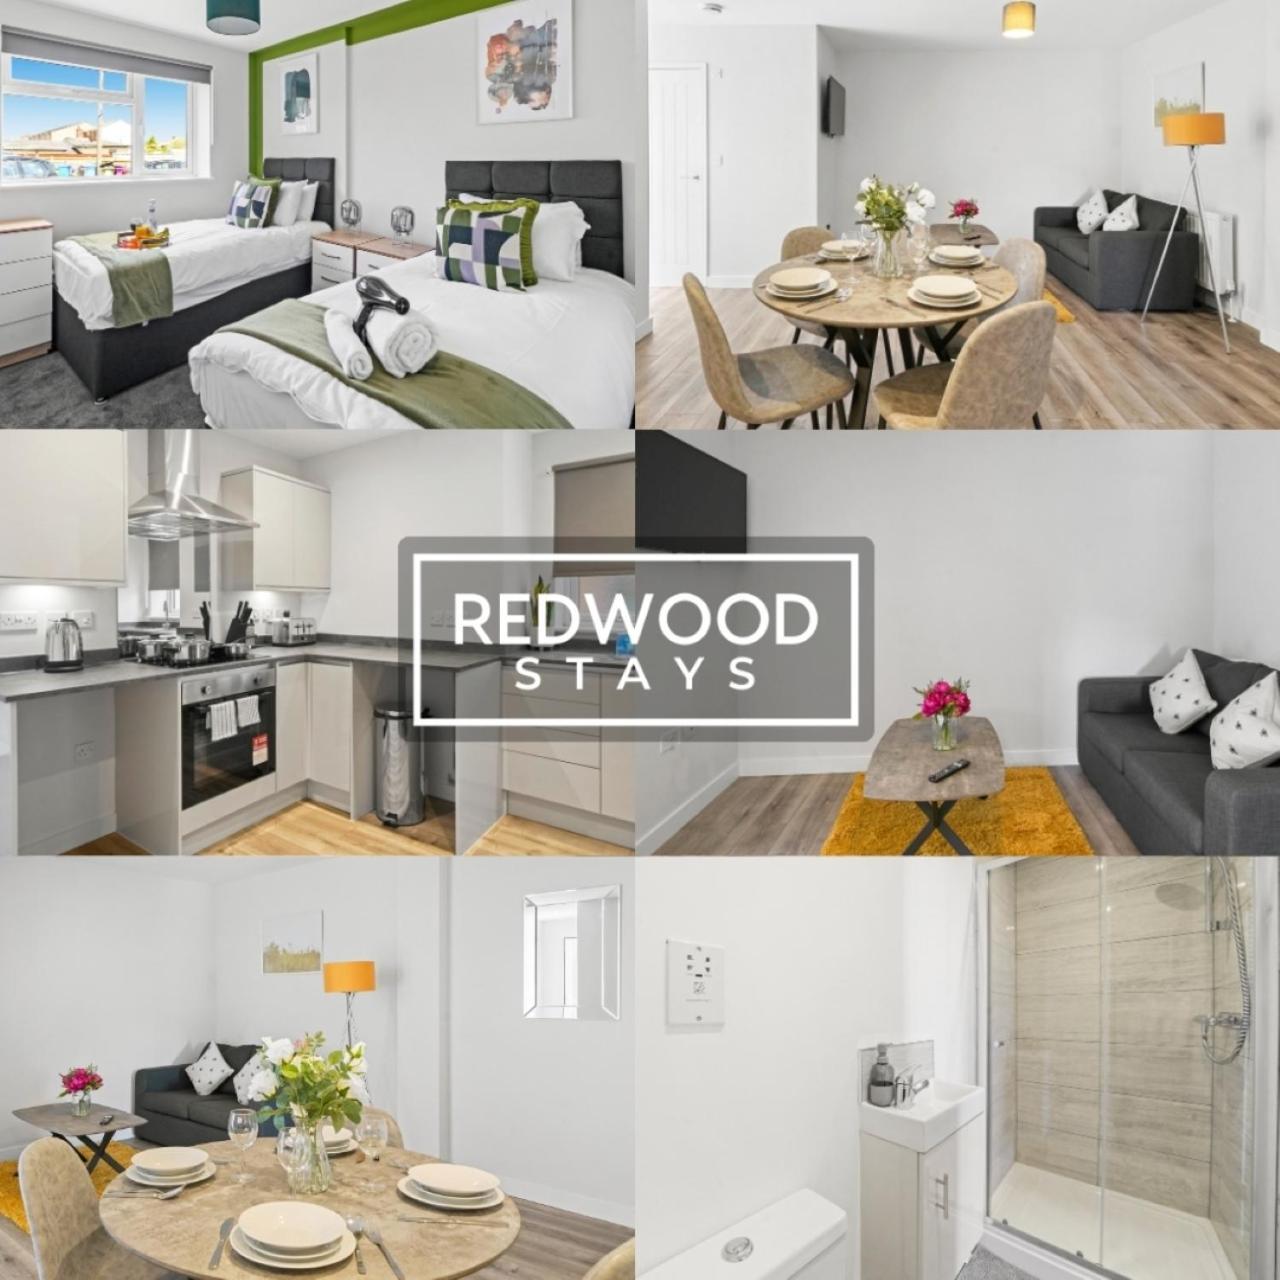 Quality 1 Bed 1 Bath Apartments For Contractors By Redwood Stays 法恩伯勒 外观 照片